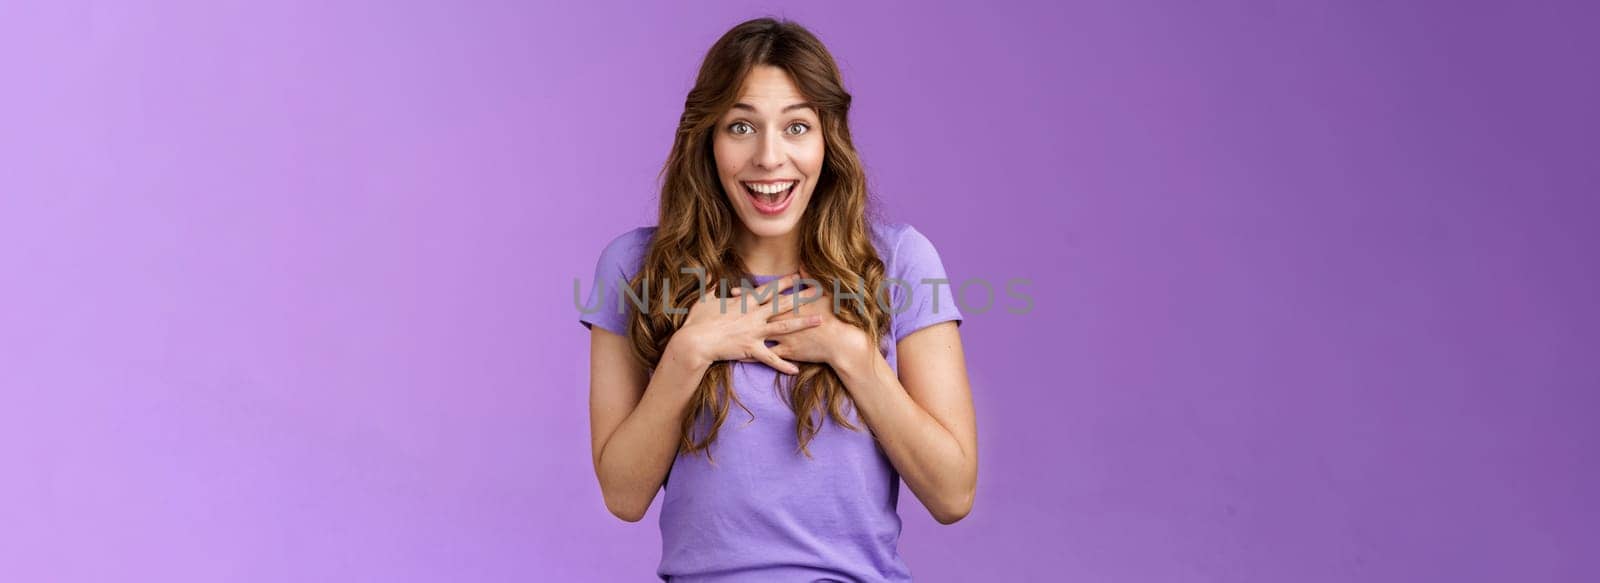 Surprised happy pleased cheerful girl brown curly hairstyle press hands heart amused delighted thanking friend adorable lovely gift smiling broadly grateful gaze camera stand purple background. Lifestyle.